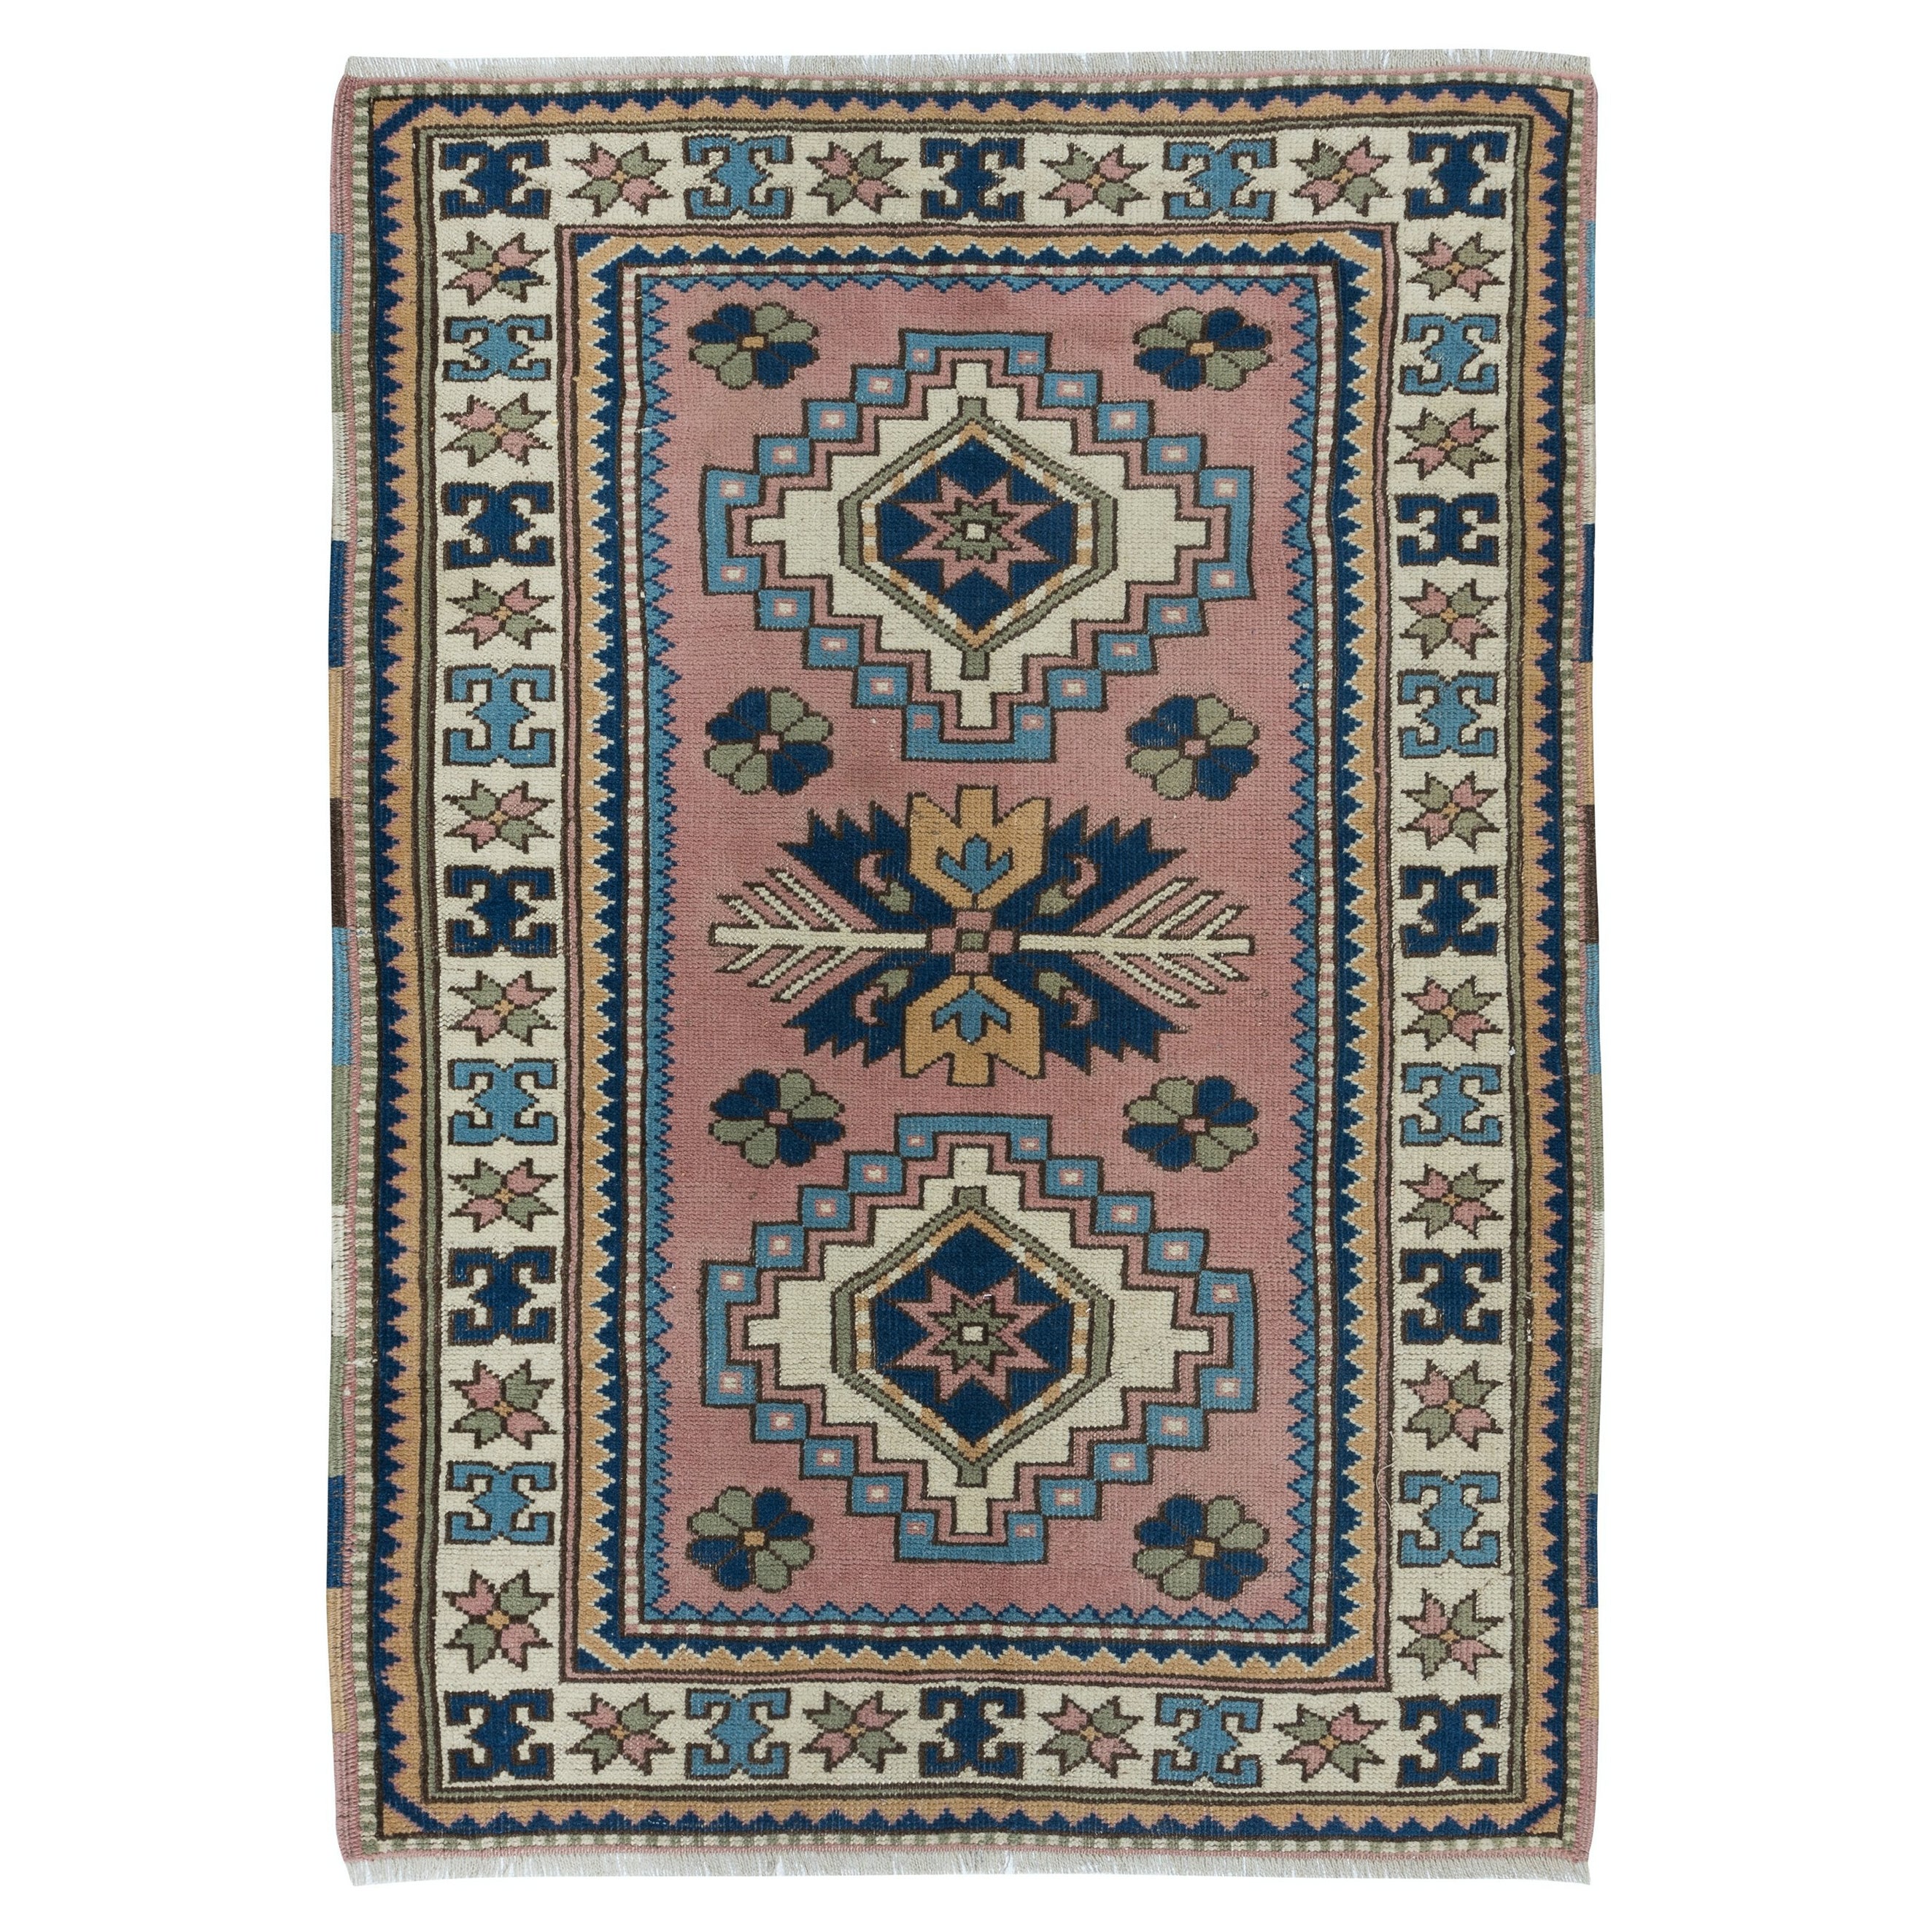 3.5x5 Ft One of a Kind Vintage Handmade Turkish Geometric Accent Rug, 100% Wool